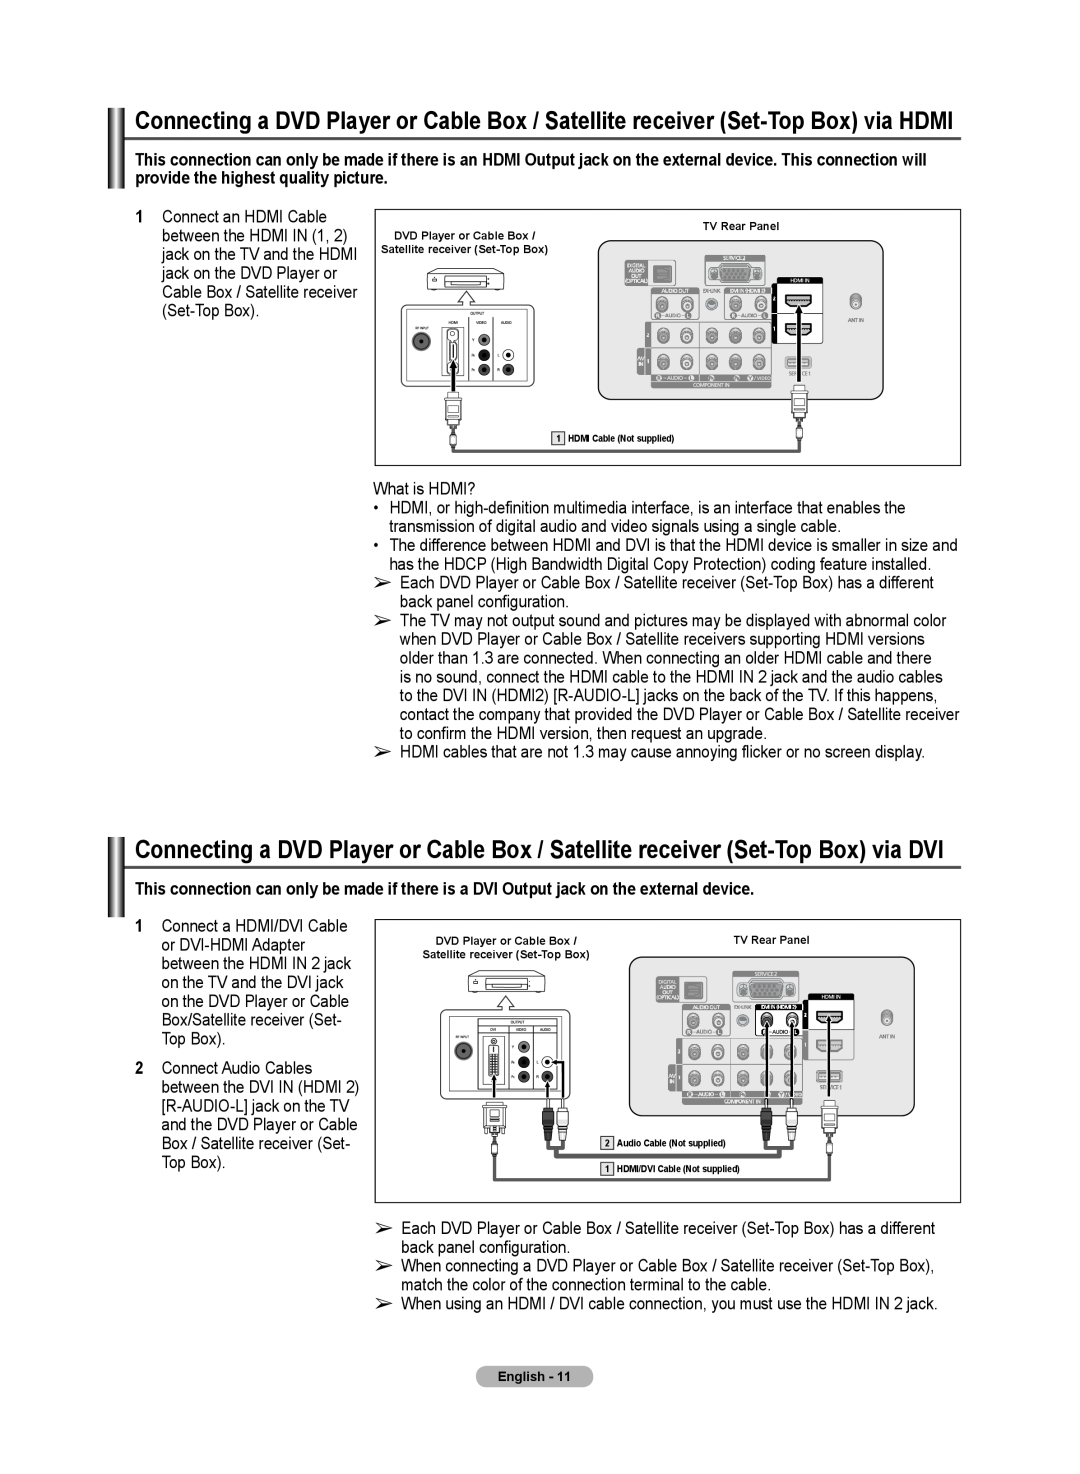 Samsung 510 user manual between the HDMI IN 1 